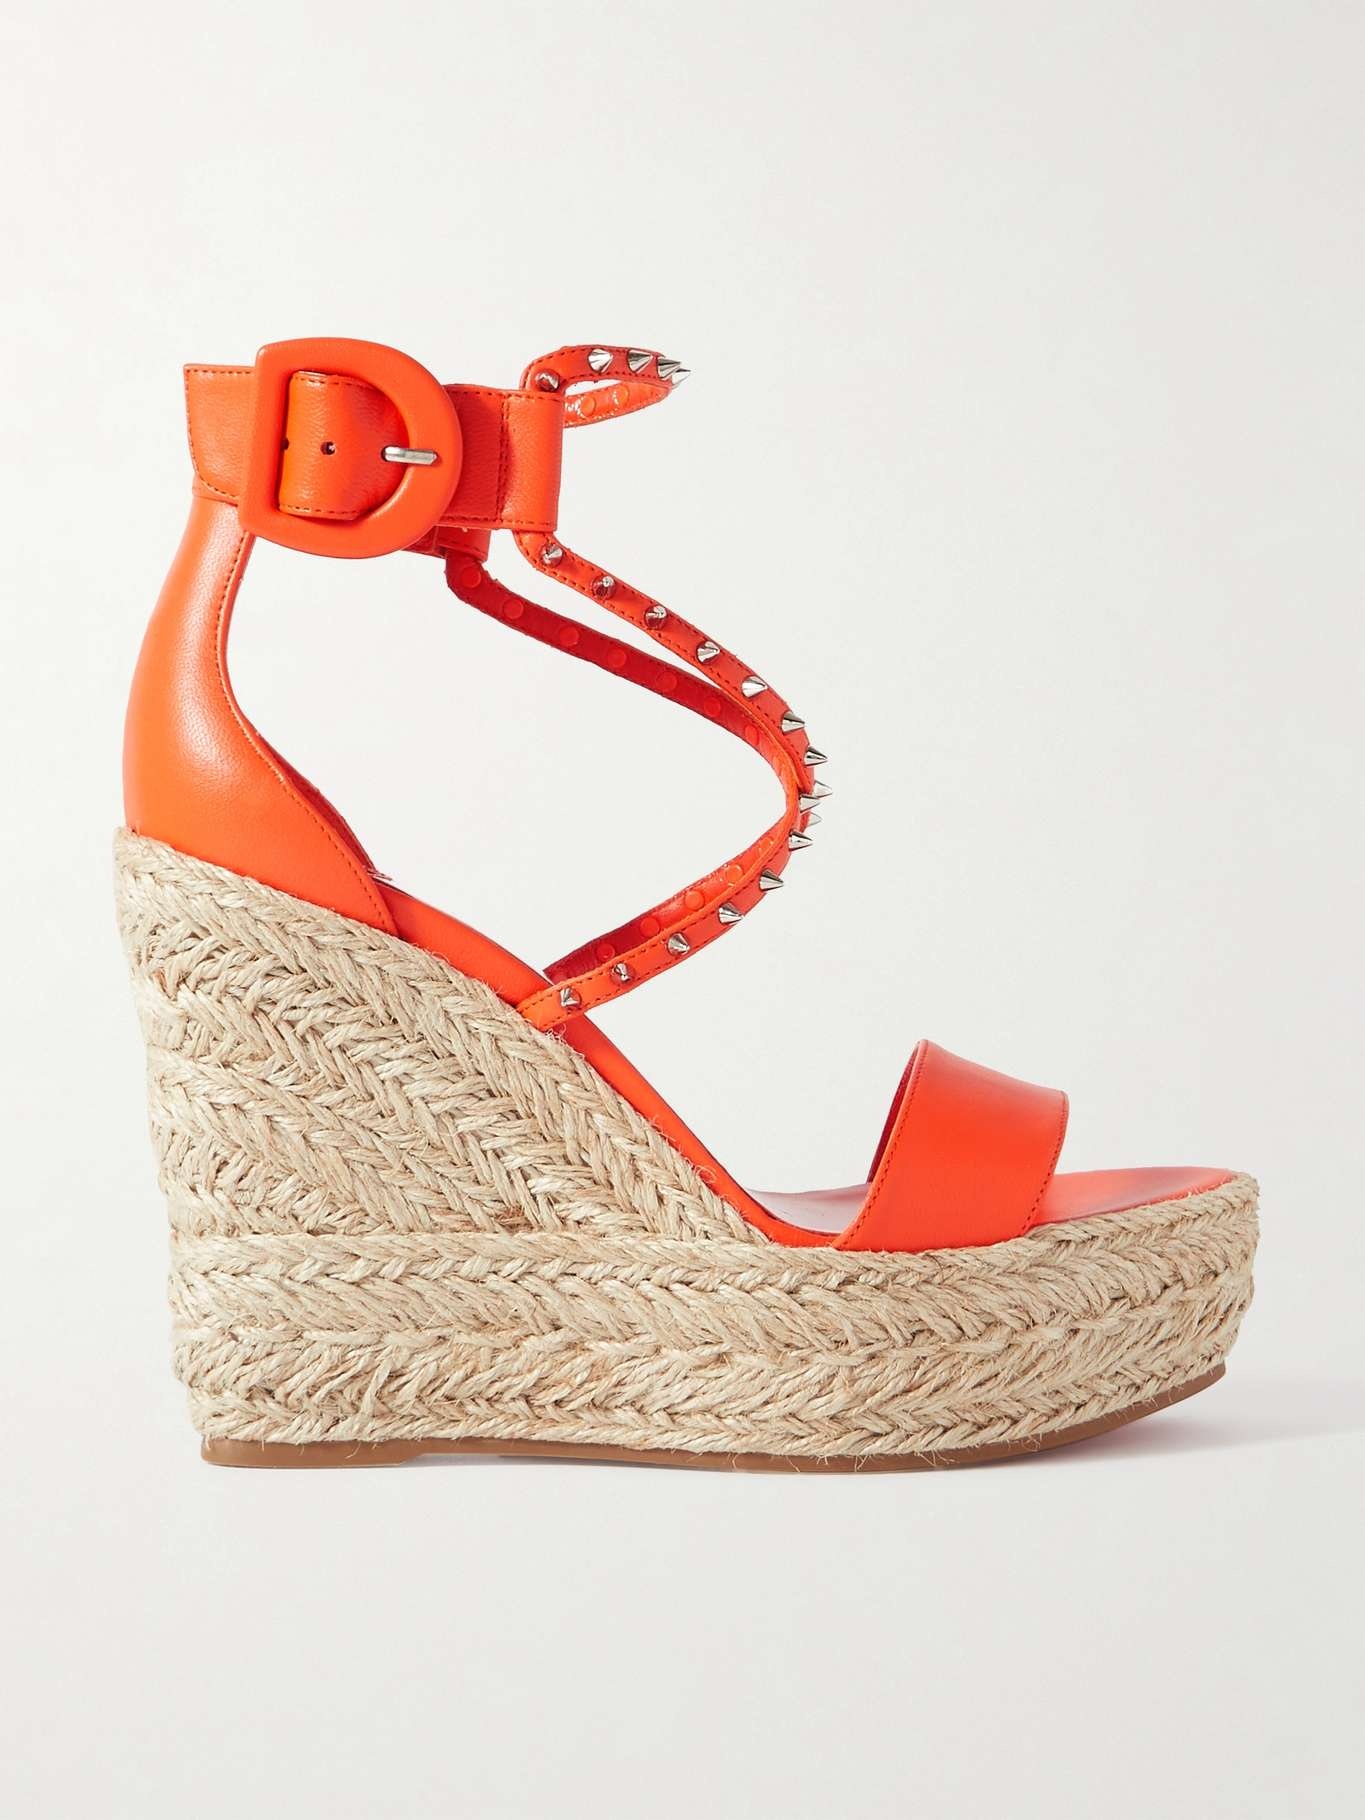 Chocazeppa 120 spiked leather espadrille wedge sandals - 1